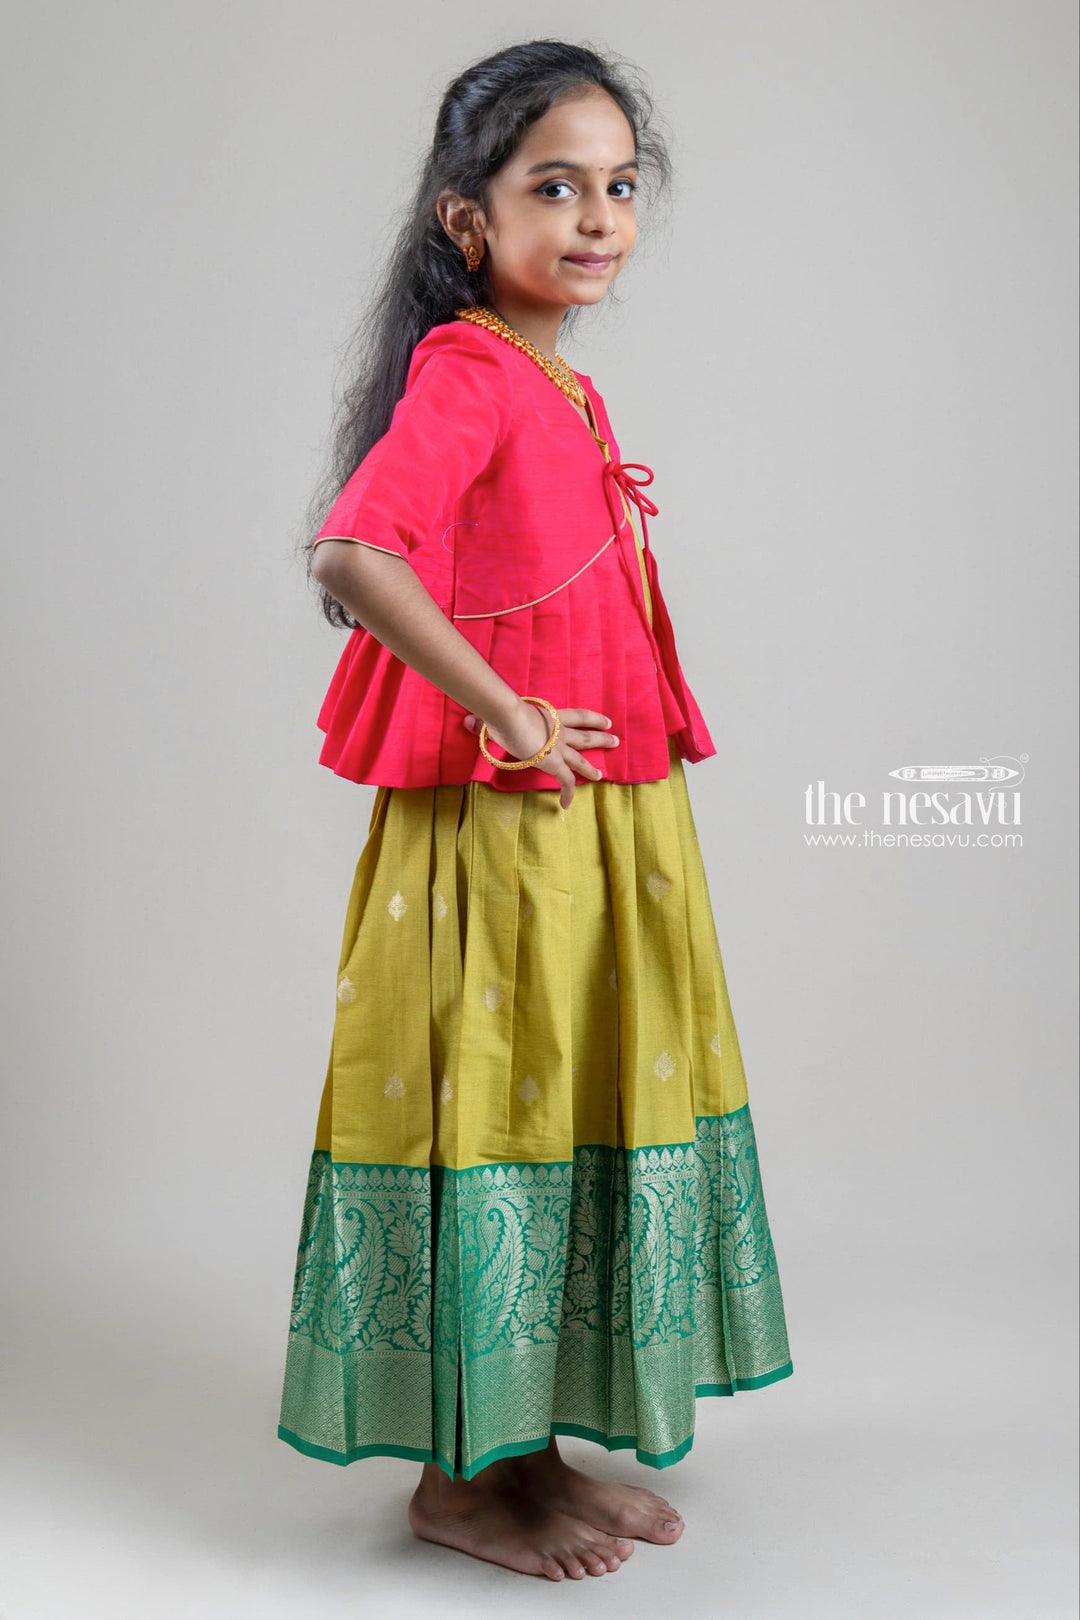 The Nesavu Silk Gown Red Silk Cotton Overcoat with Knife Pleated and Green Butta Printed Silk Cotton Gown Nesavu Girls Casual Cotton Wear Collection | The Nesavu